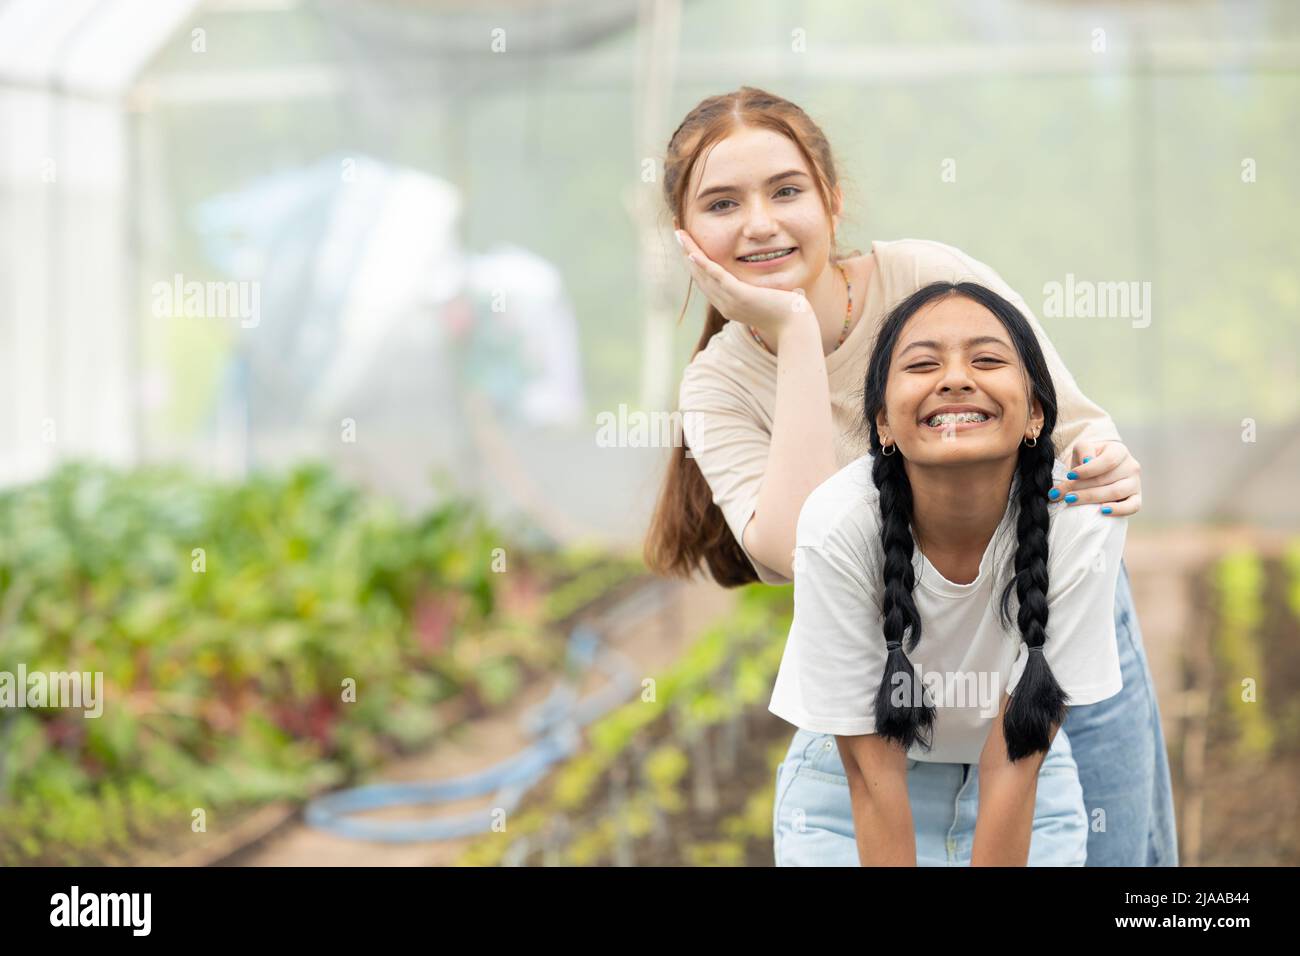 two young teenager girl happy smiling together friend mix race in park garden Stock Photo